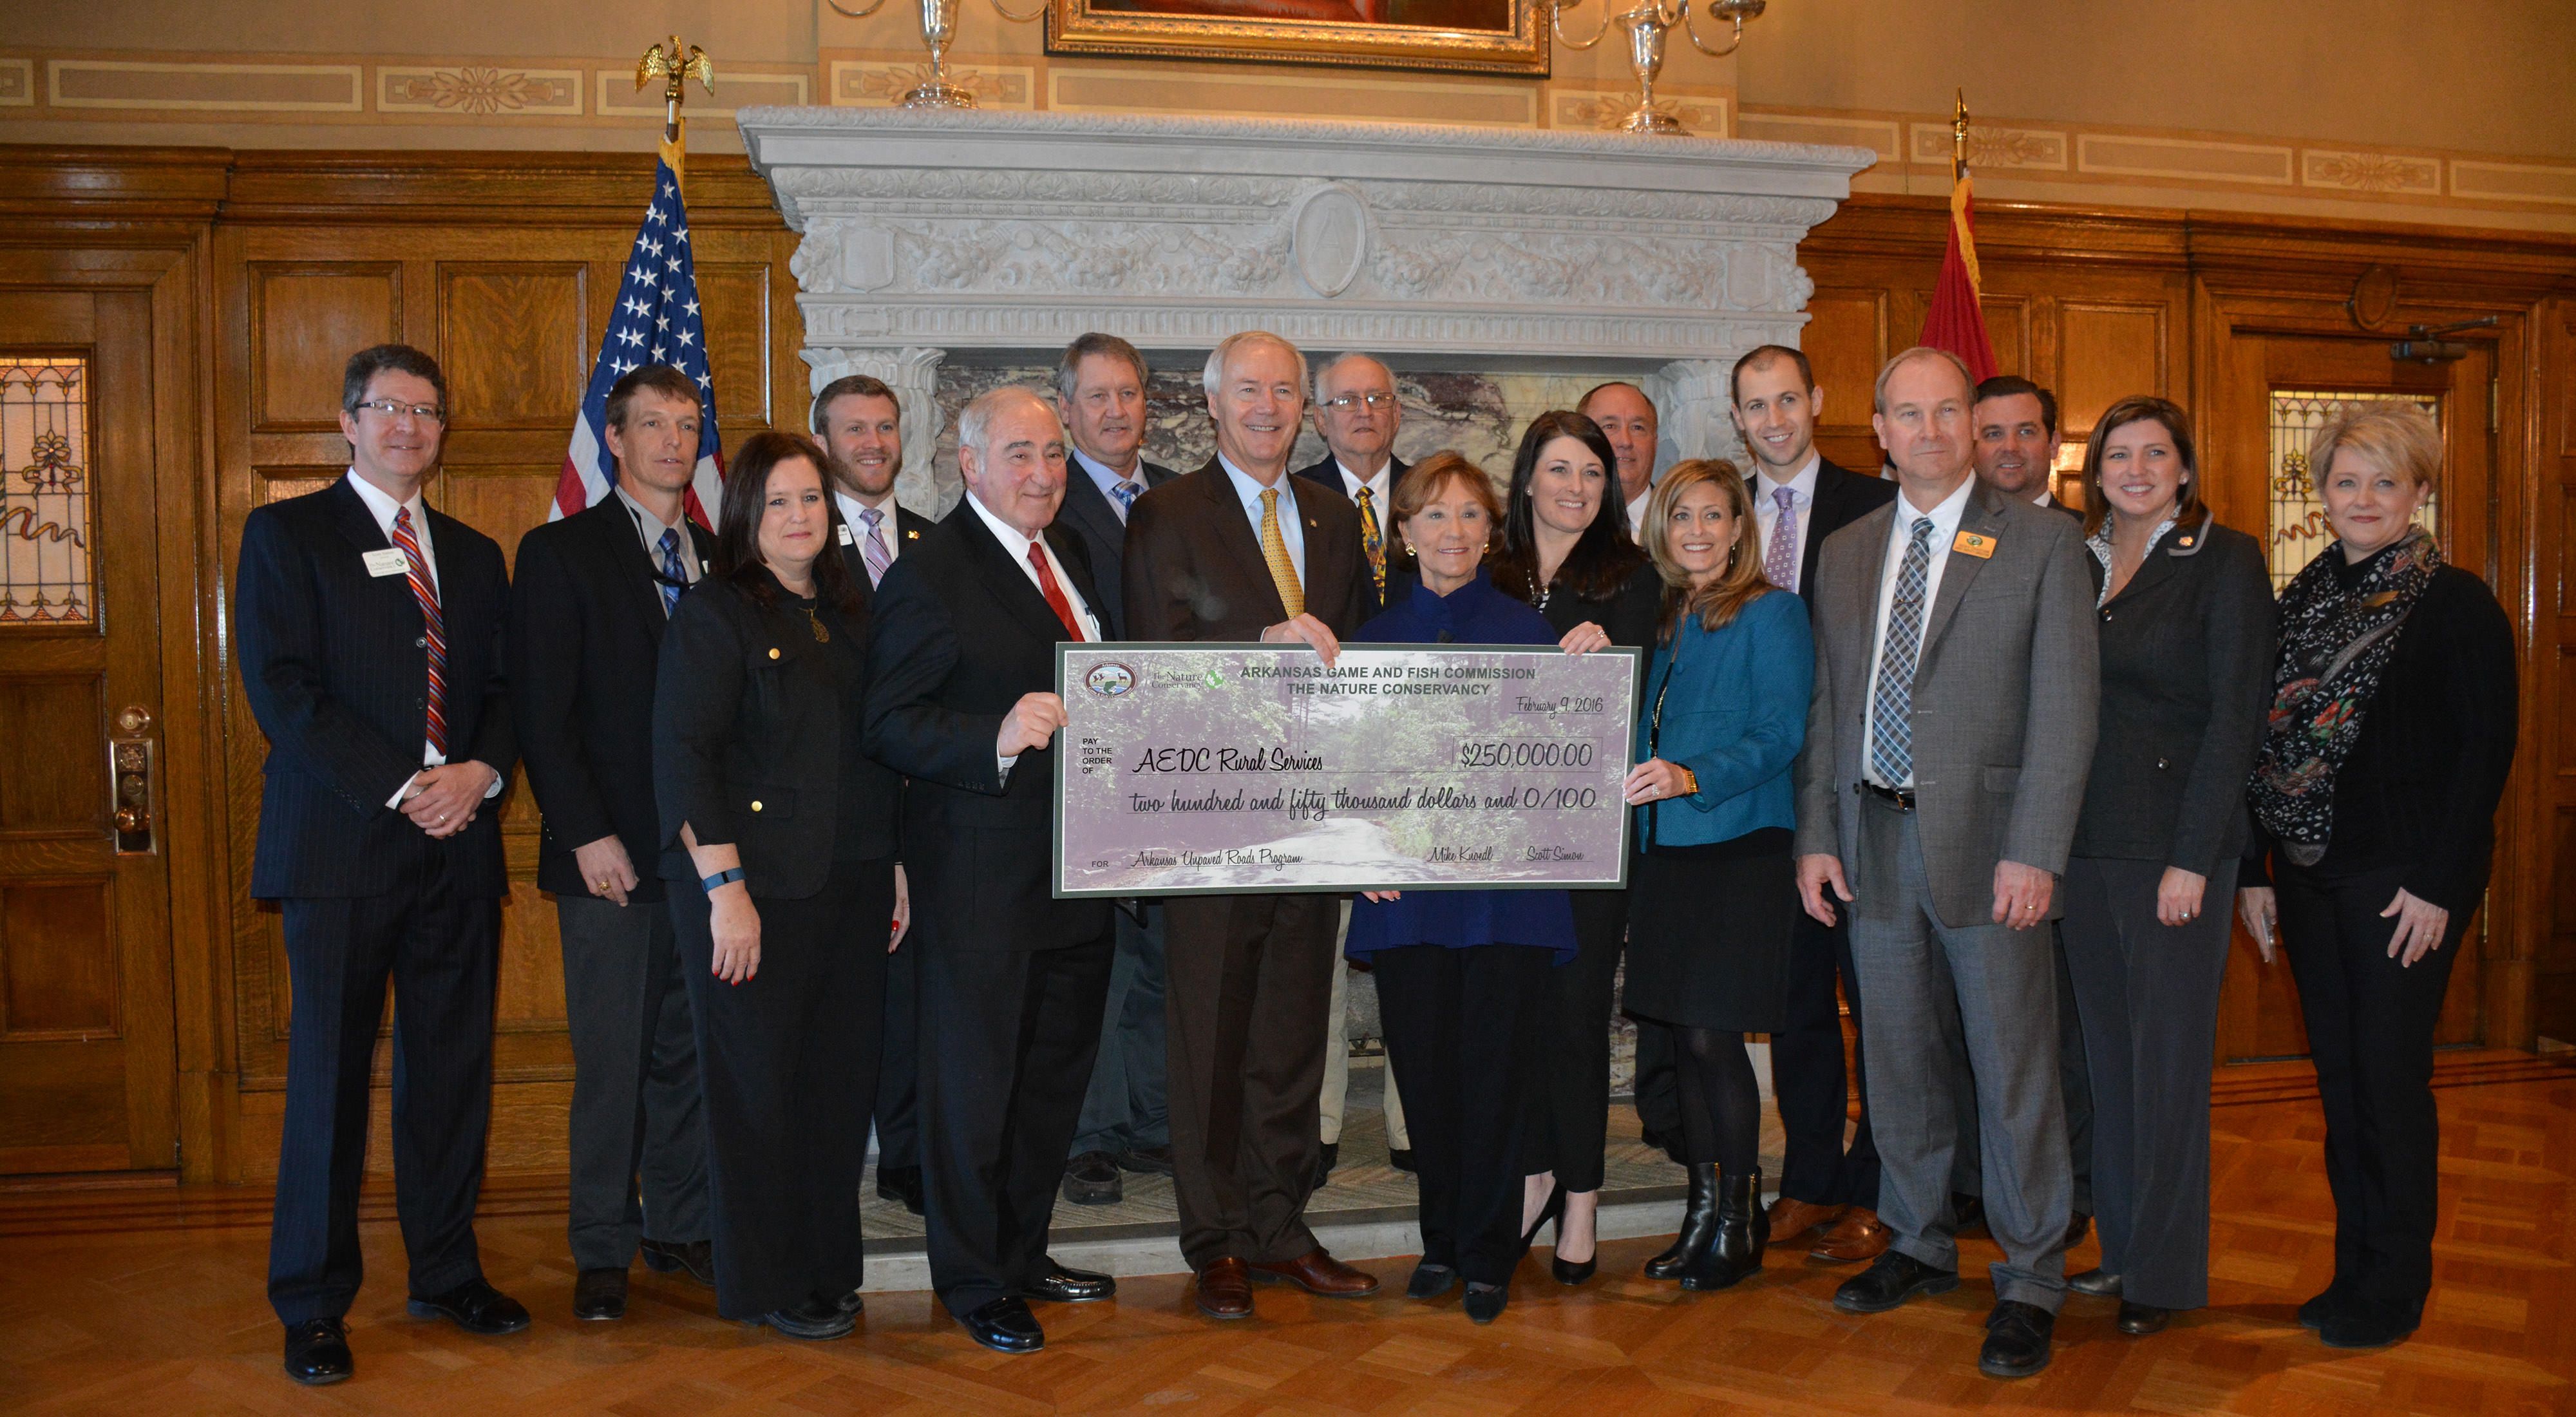 The Arkansas Game and Fish Commission and The Nature Conservancy present Governor Asa Hutchinson and the Department of Rural Services with a check to support the Unpaved Roads Program.